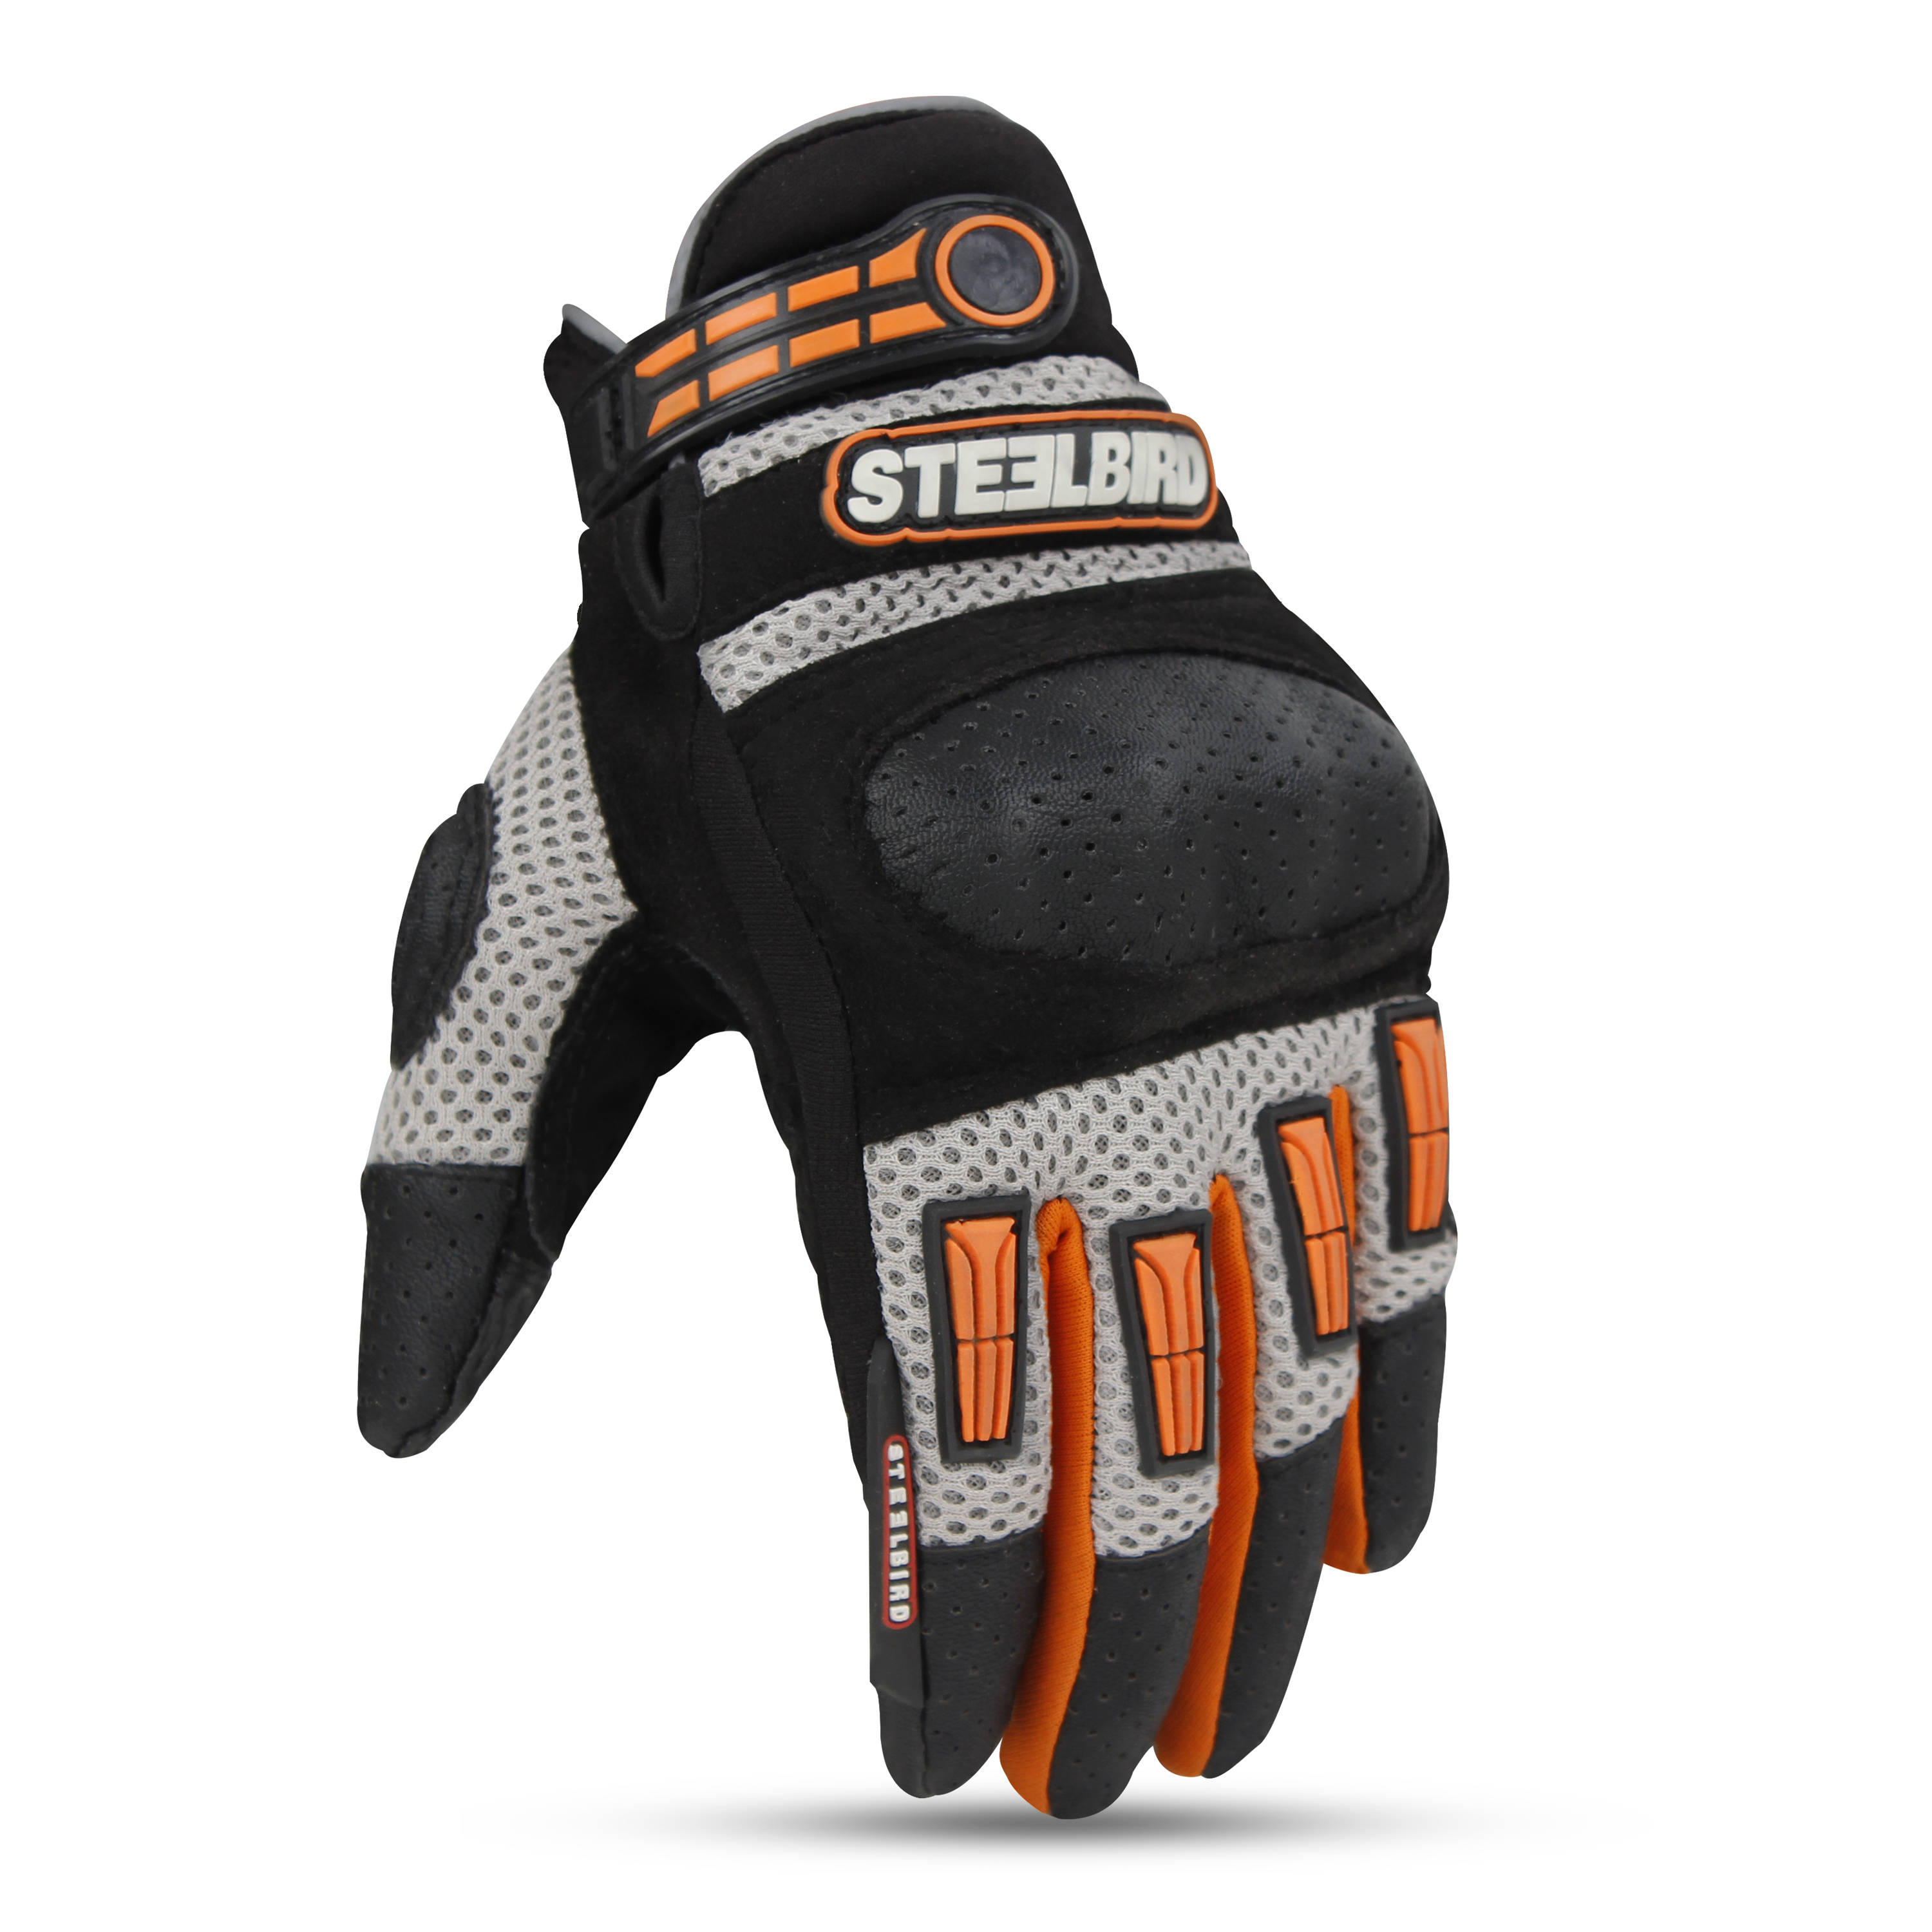 Steelbird Adventure A-1 Full Finger Riding Gloves With Touch Screen Sensitivity At Thumb & Index Finger, Protective Off-Road Motorbike Racing (Orange)